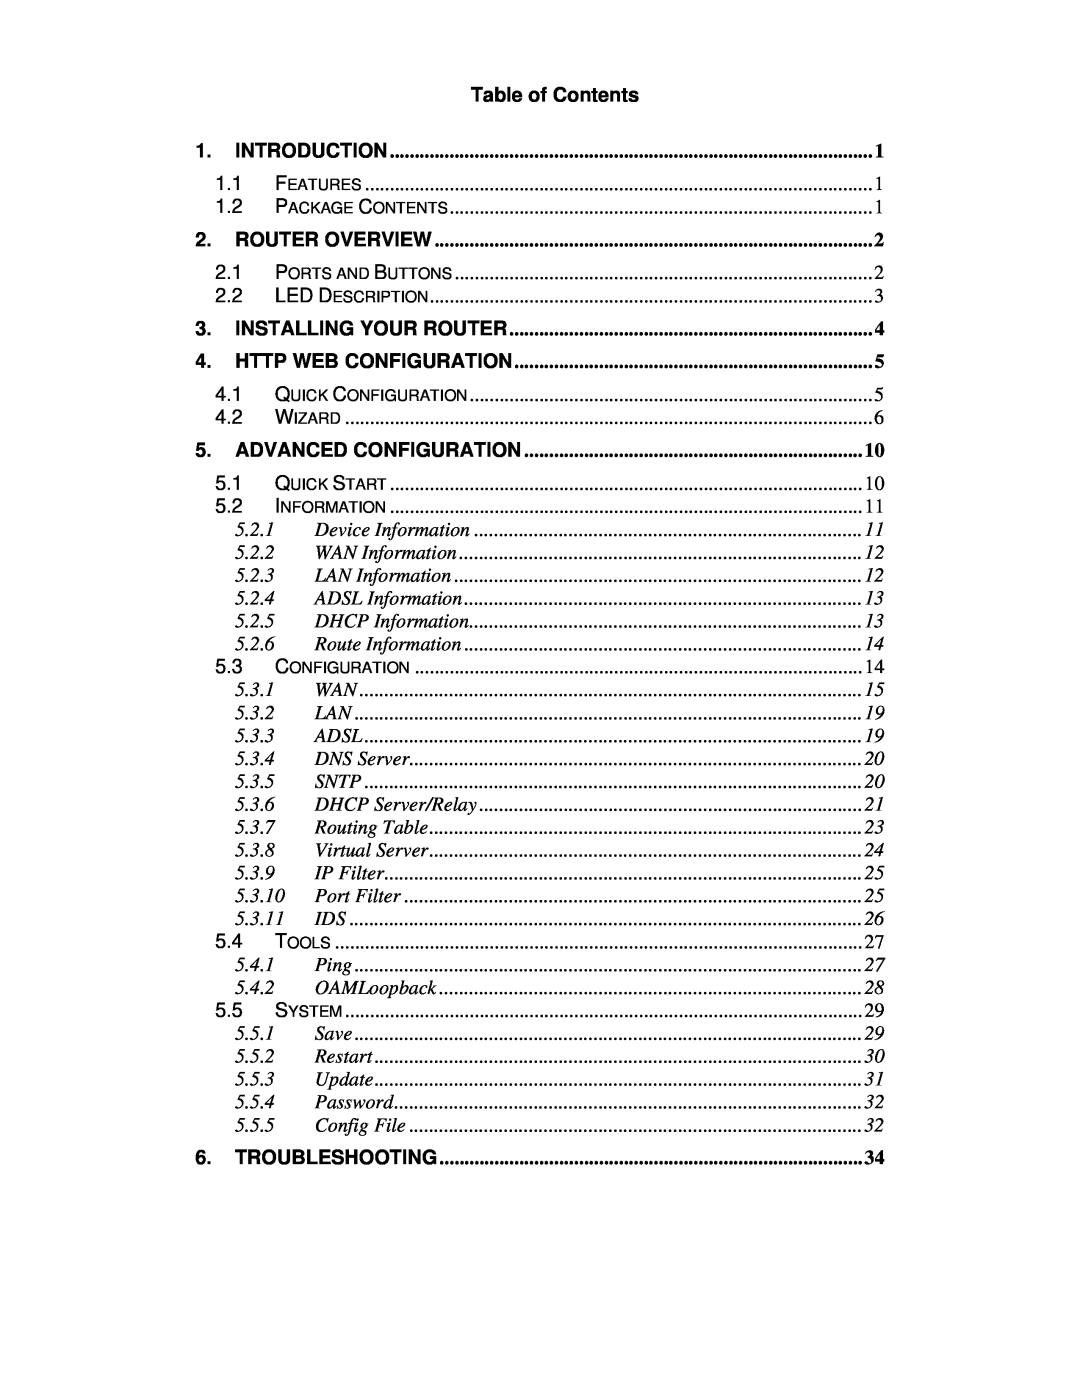 Best Data Products DSL542EU manual Table of Contents, 5.3.10, 5.3.11, Advanced Configuration 